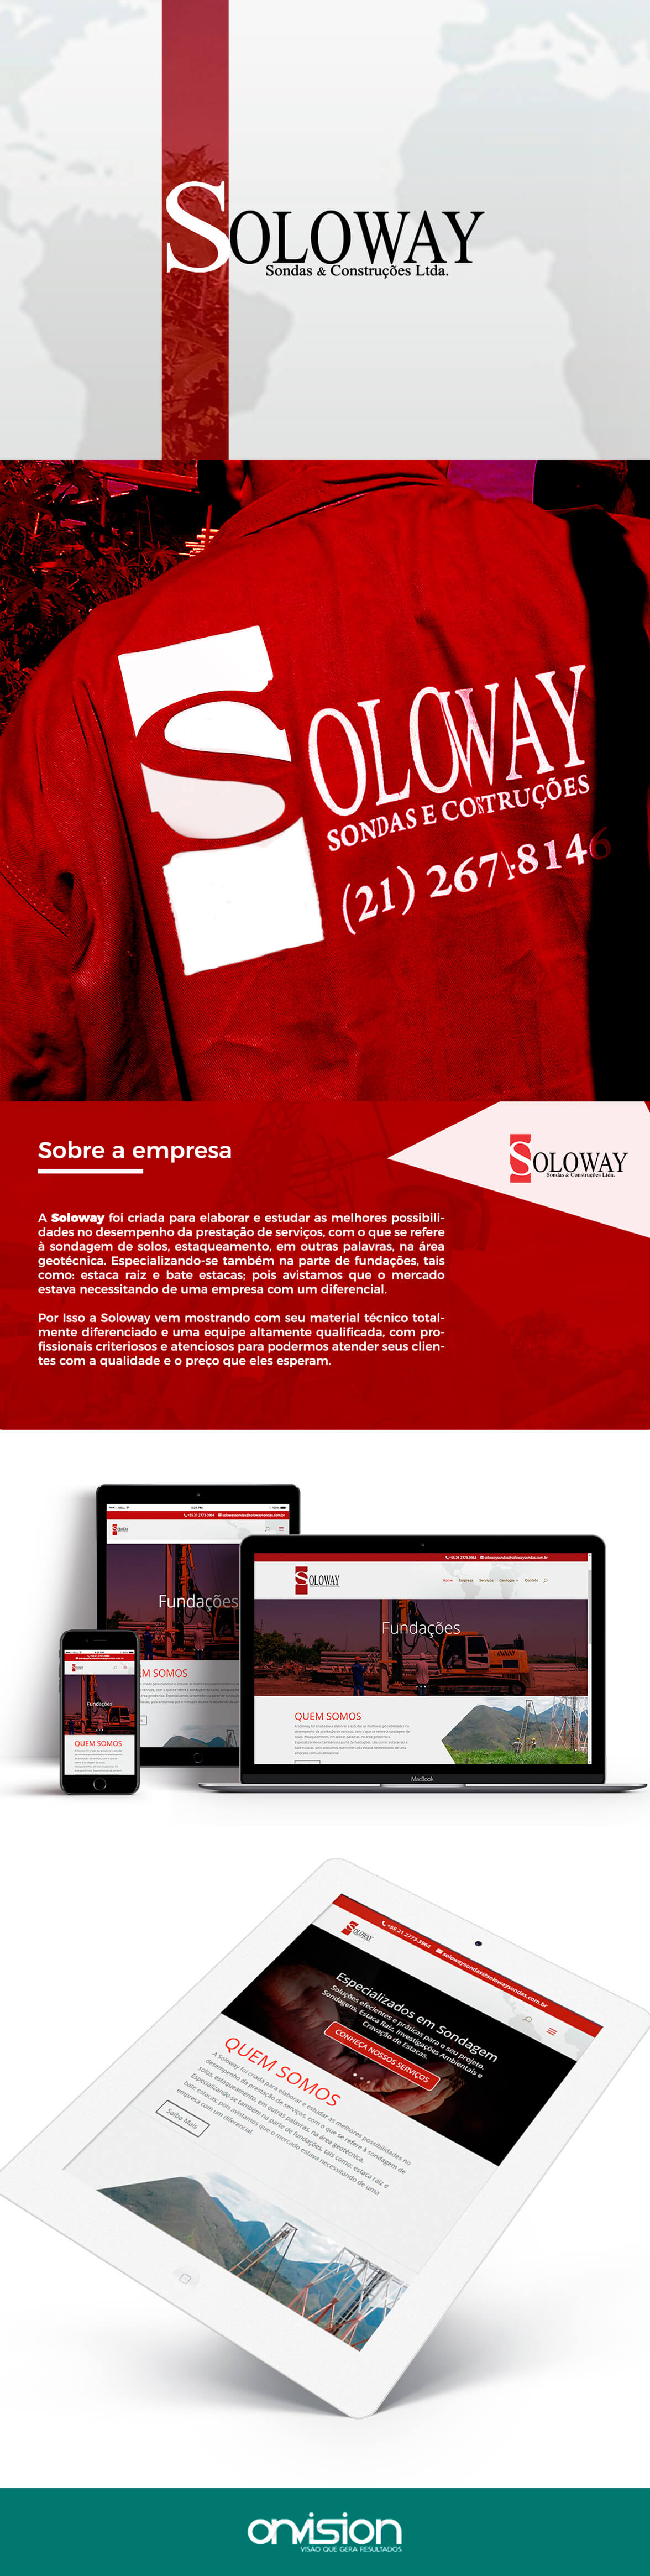 Soloway-criacao-sites